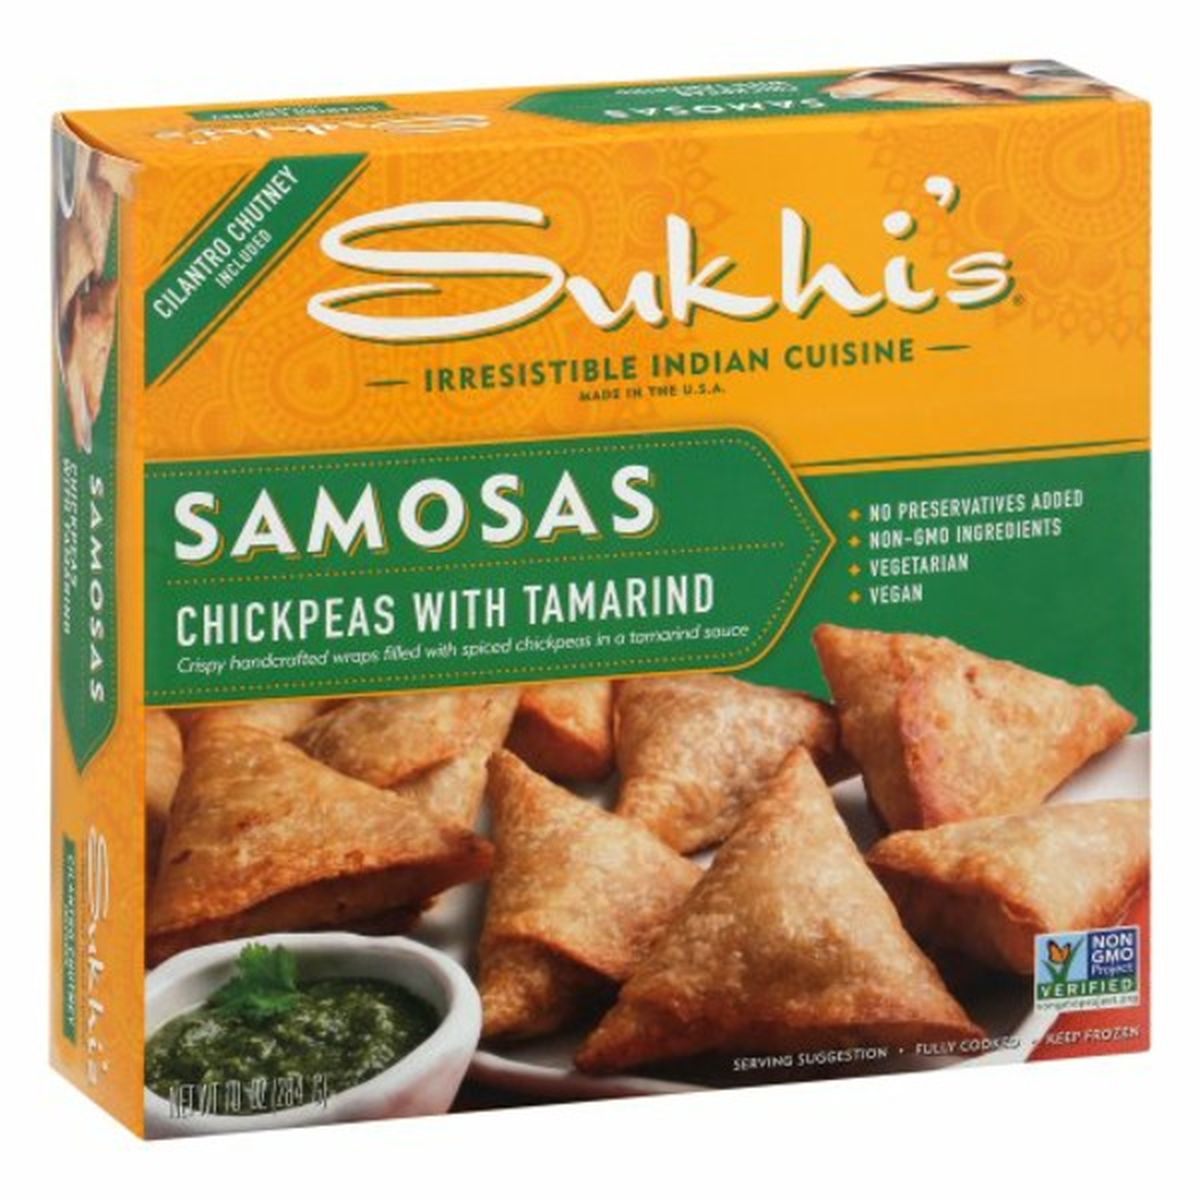 Calories in Sukhi's Samosas, Chickpeas with Tamarind